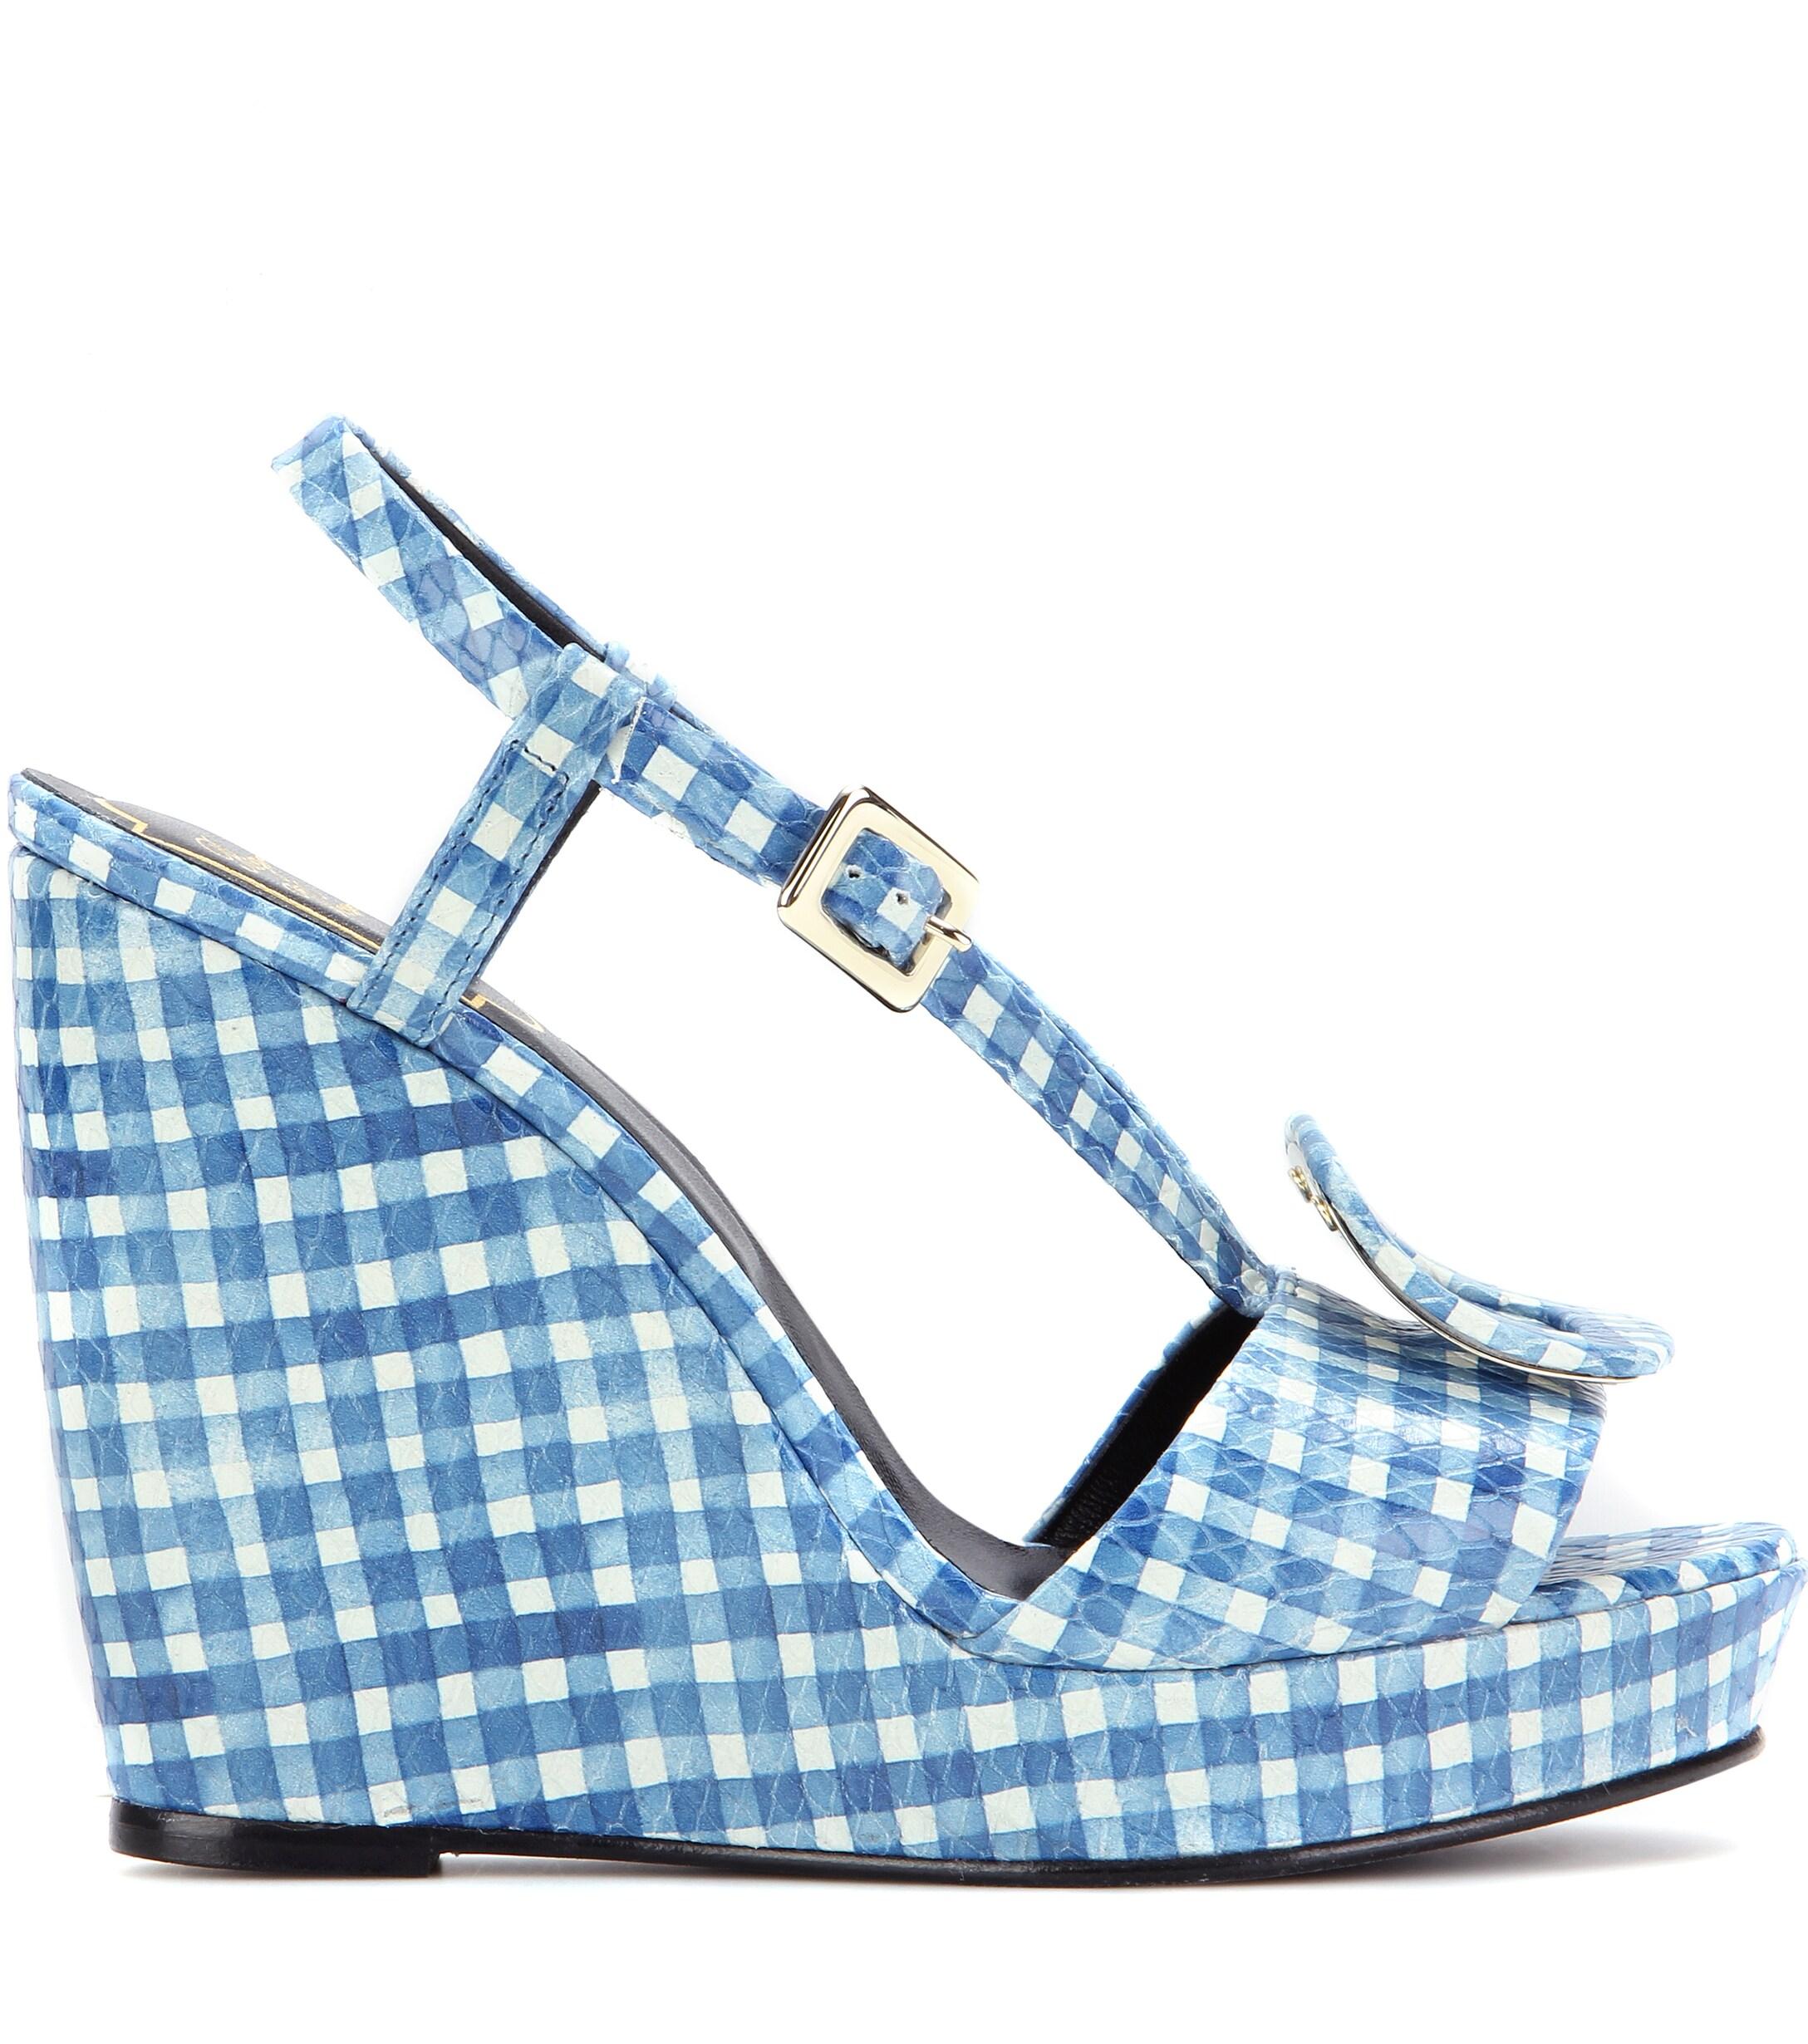 Roger Vivier Chips Printed Embossed Leather Wedge Sandals in Blue ...